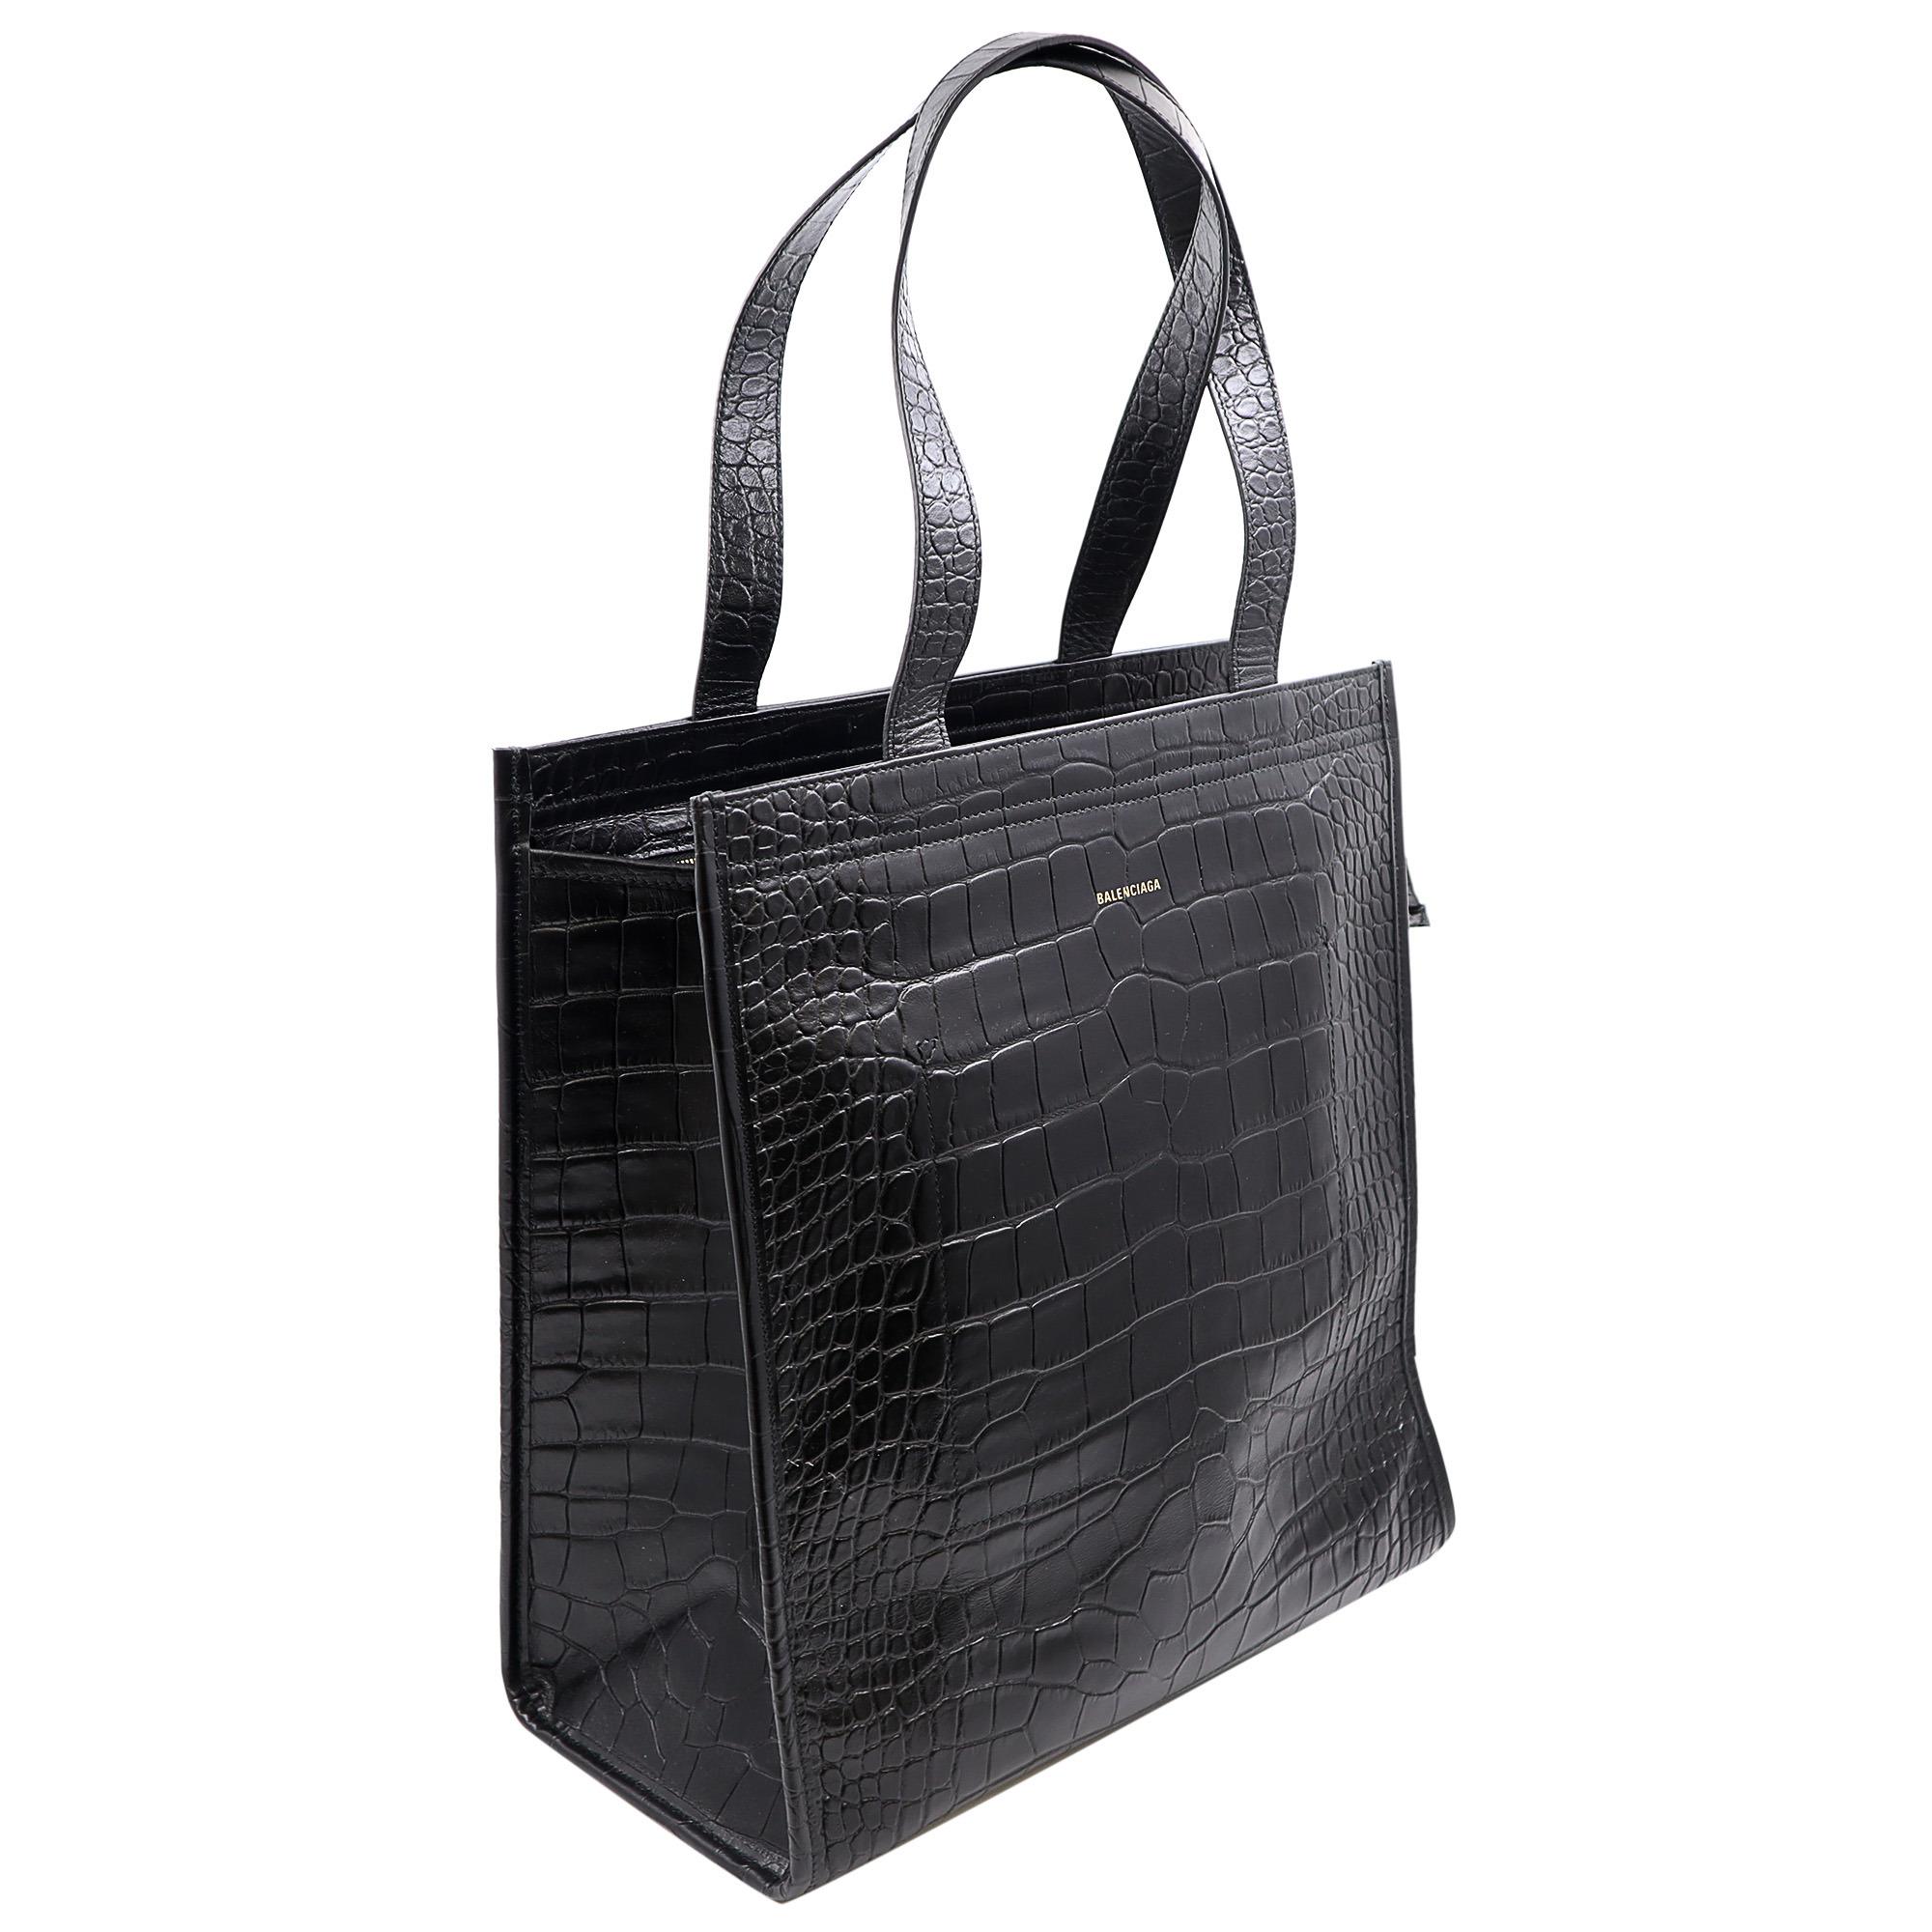 Balenciaga Bazar croc embossed leather tote bag. A timeless black hue and top handles, all very cleverly assembled to look the part of the Bazar bags you see in the market. A zipper secures the spacious interior of the bag with two interior slip